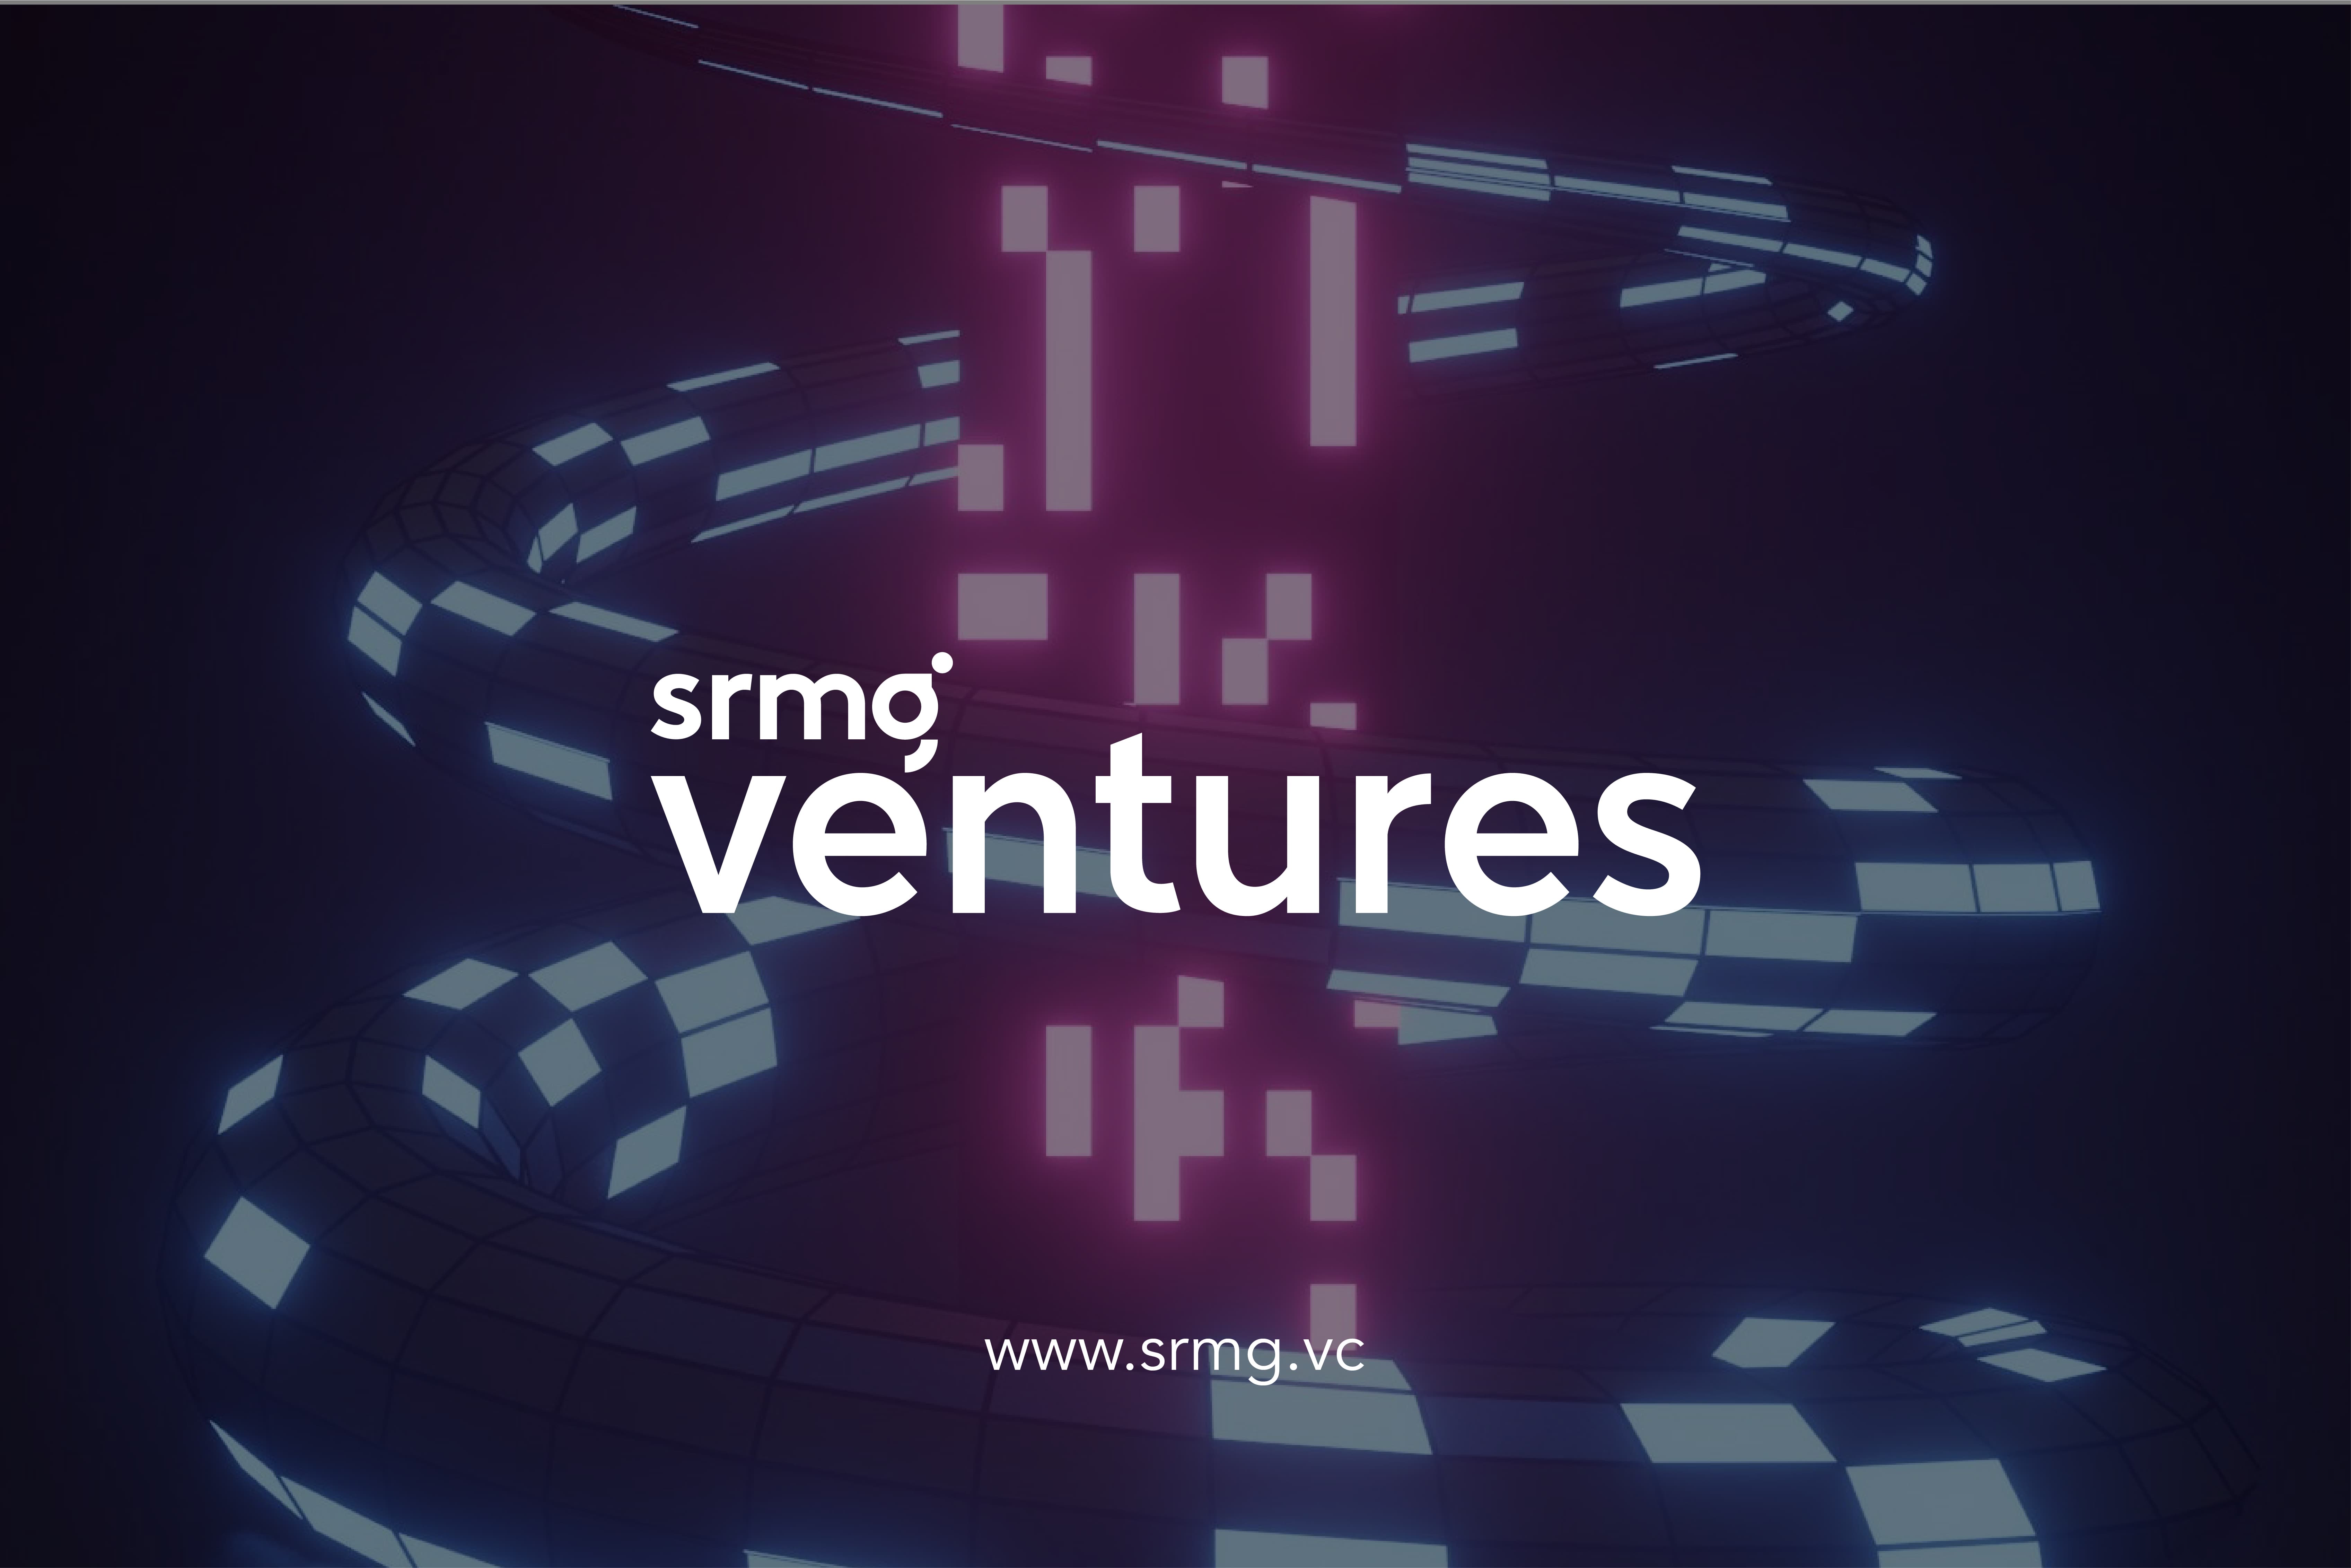 SRMG launches new venture capital arm, SRMG Ventures, with first investments in regional content studio and immersive platform companies